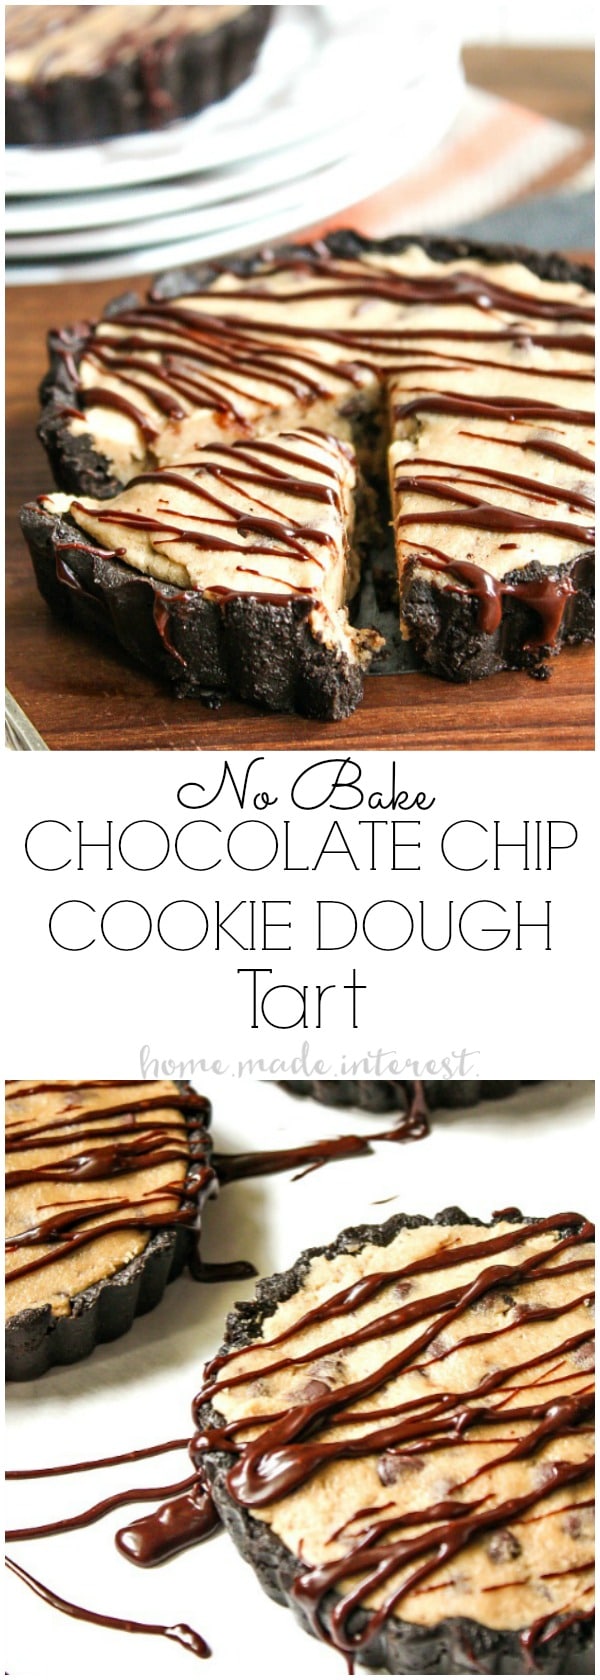 No Bake Chocolate Chip Cookie Dough Tart | This is a no bake dessert recipe that is quick and easy to make and oh so good! No bake chocolate chip cookie dough tarts have a no bake Oreo crust and are filled with no bake chocolate chip cookie dough. Drizzle this no bake dessert with a little chocolate and serve it to friends and family at your next party!